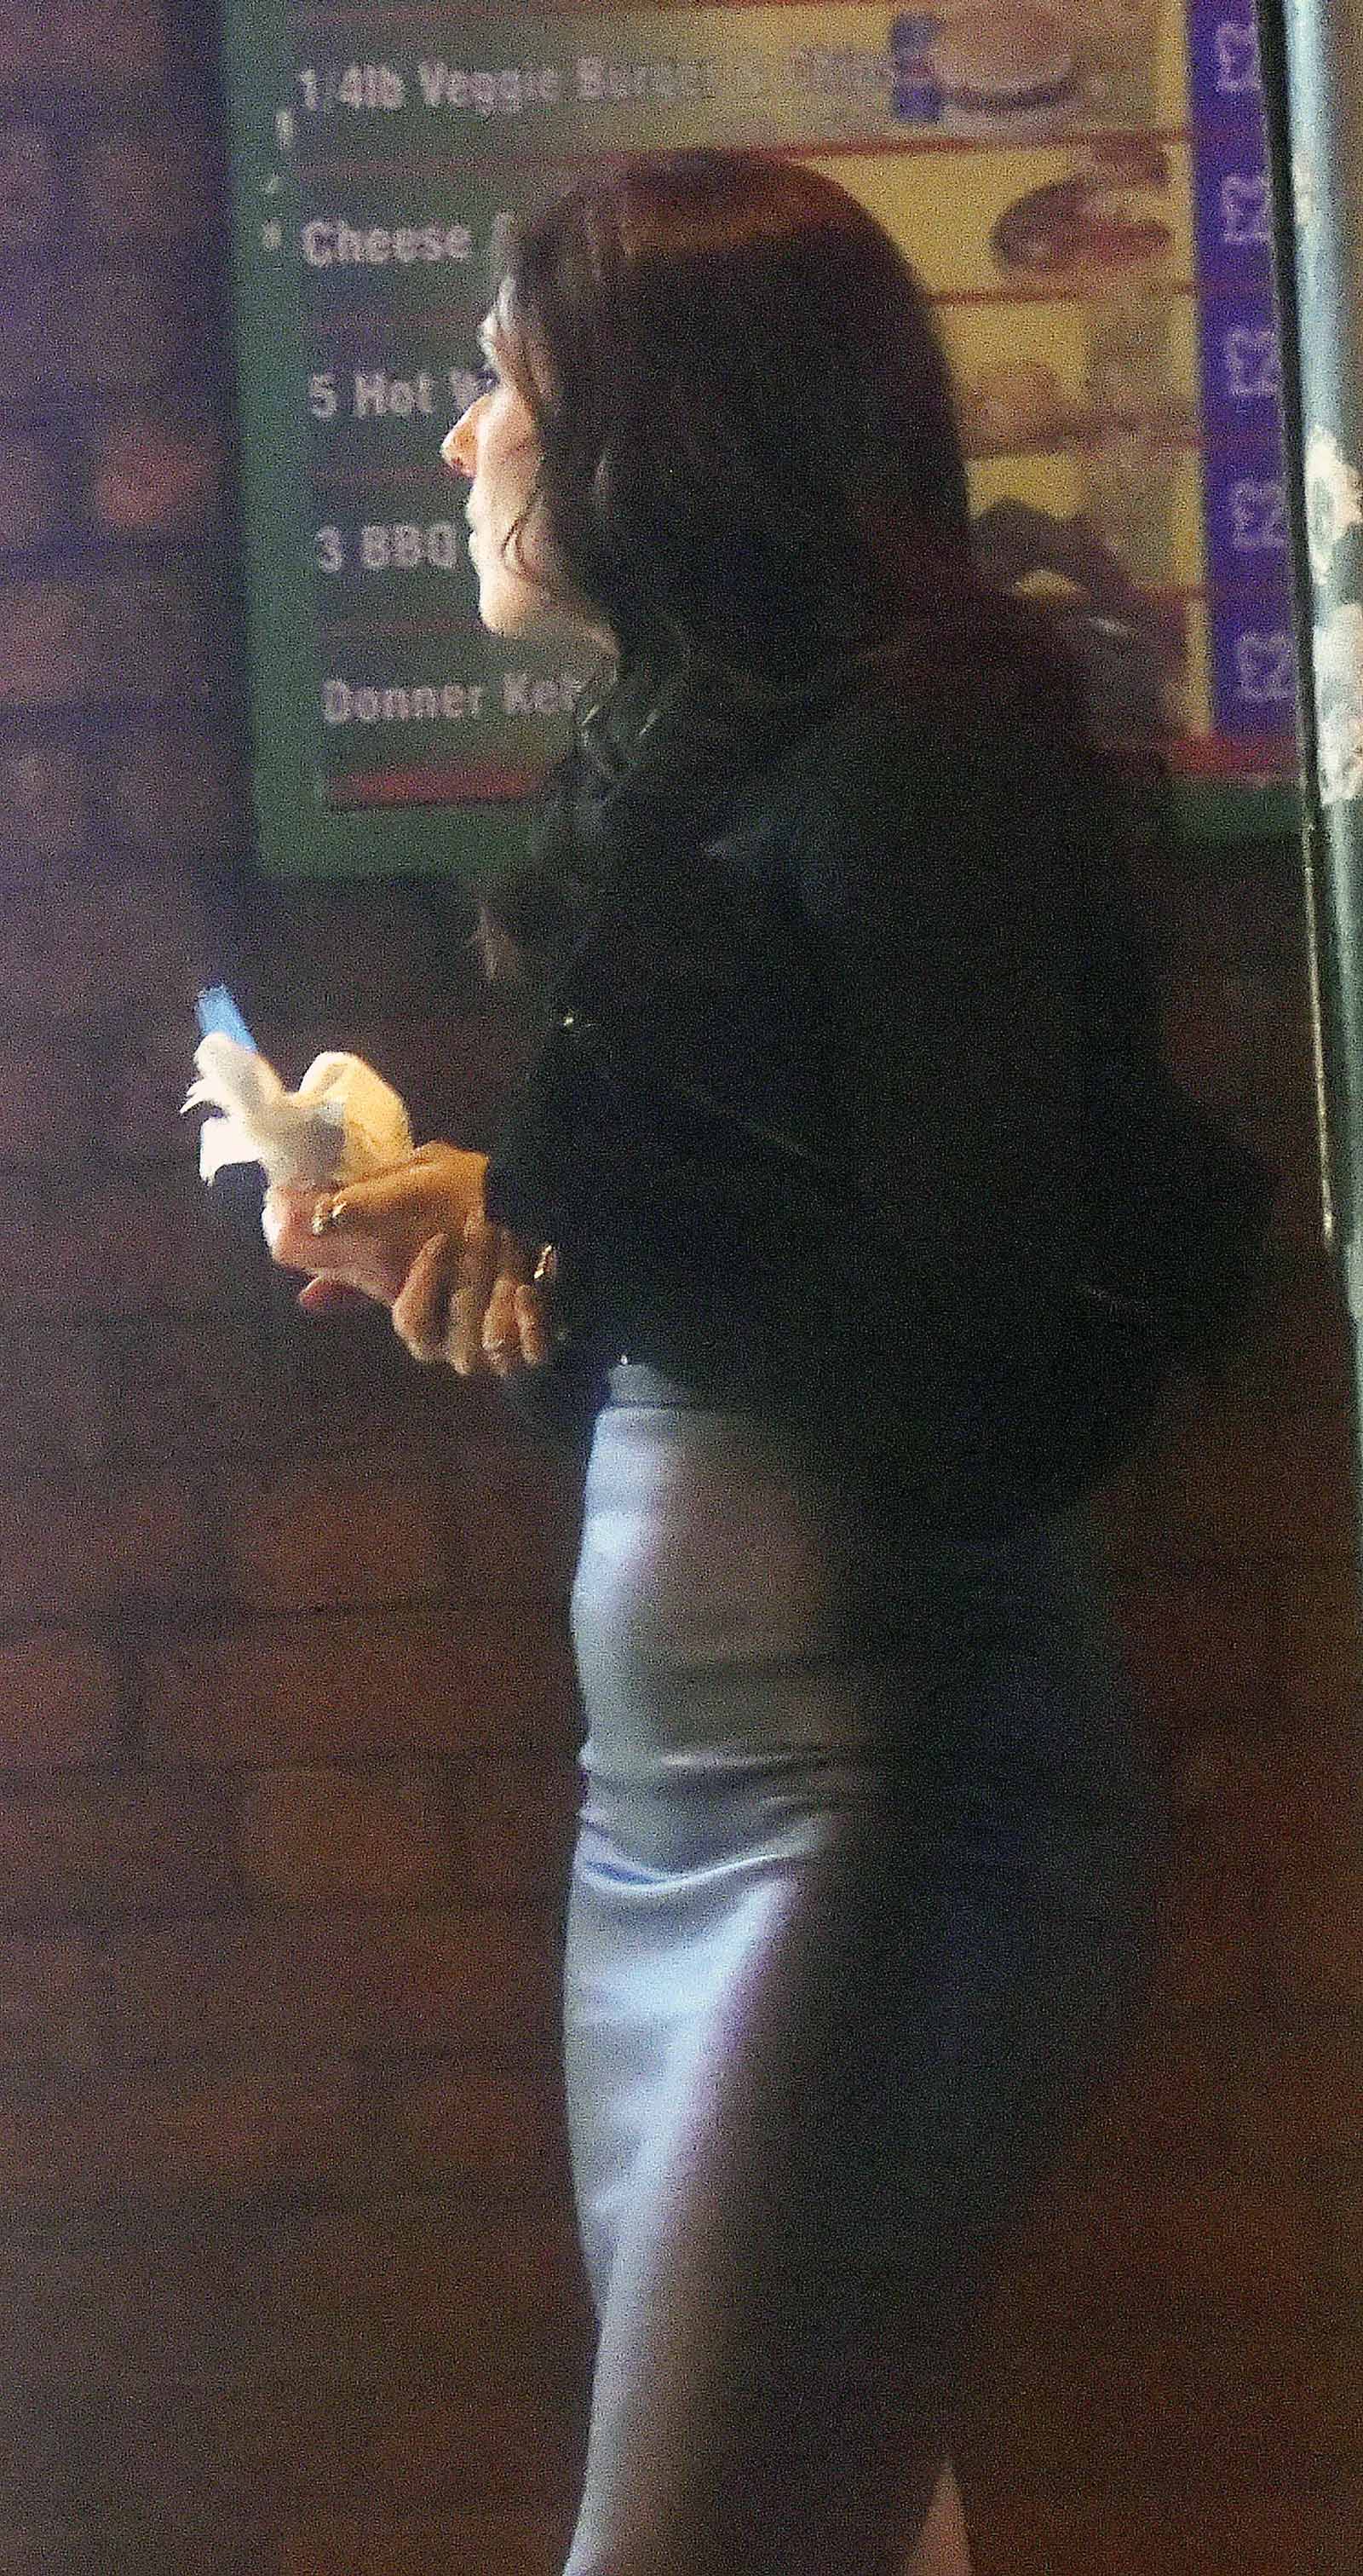 Kym Marsh out and about in Manchester